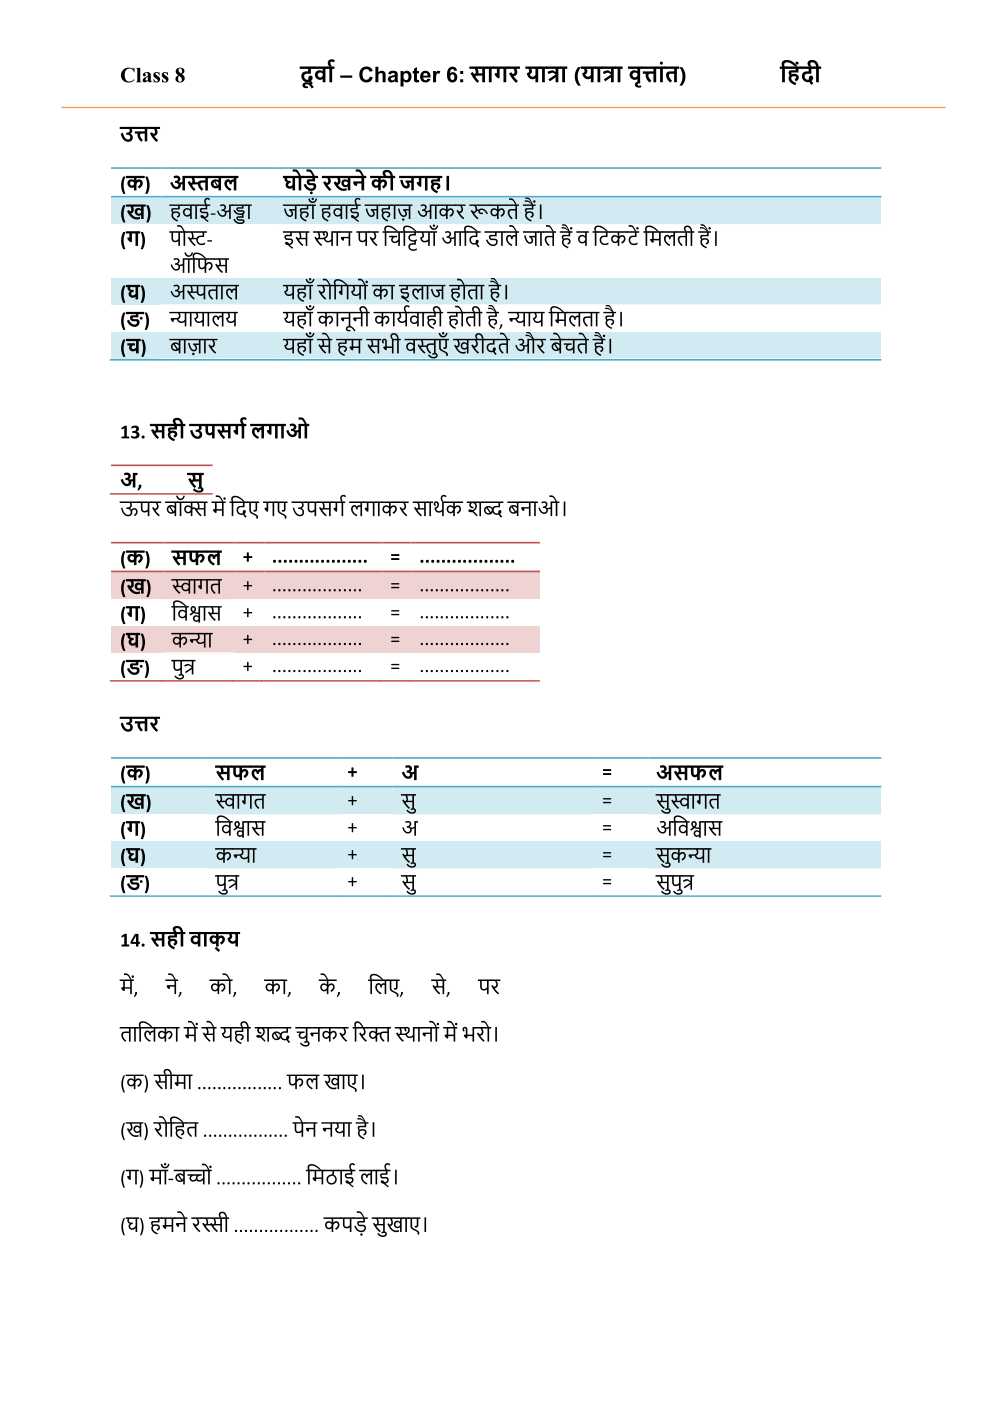 NCERT Solutions For Class 8 Hindi Durva Chapter 6